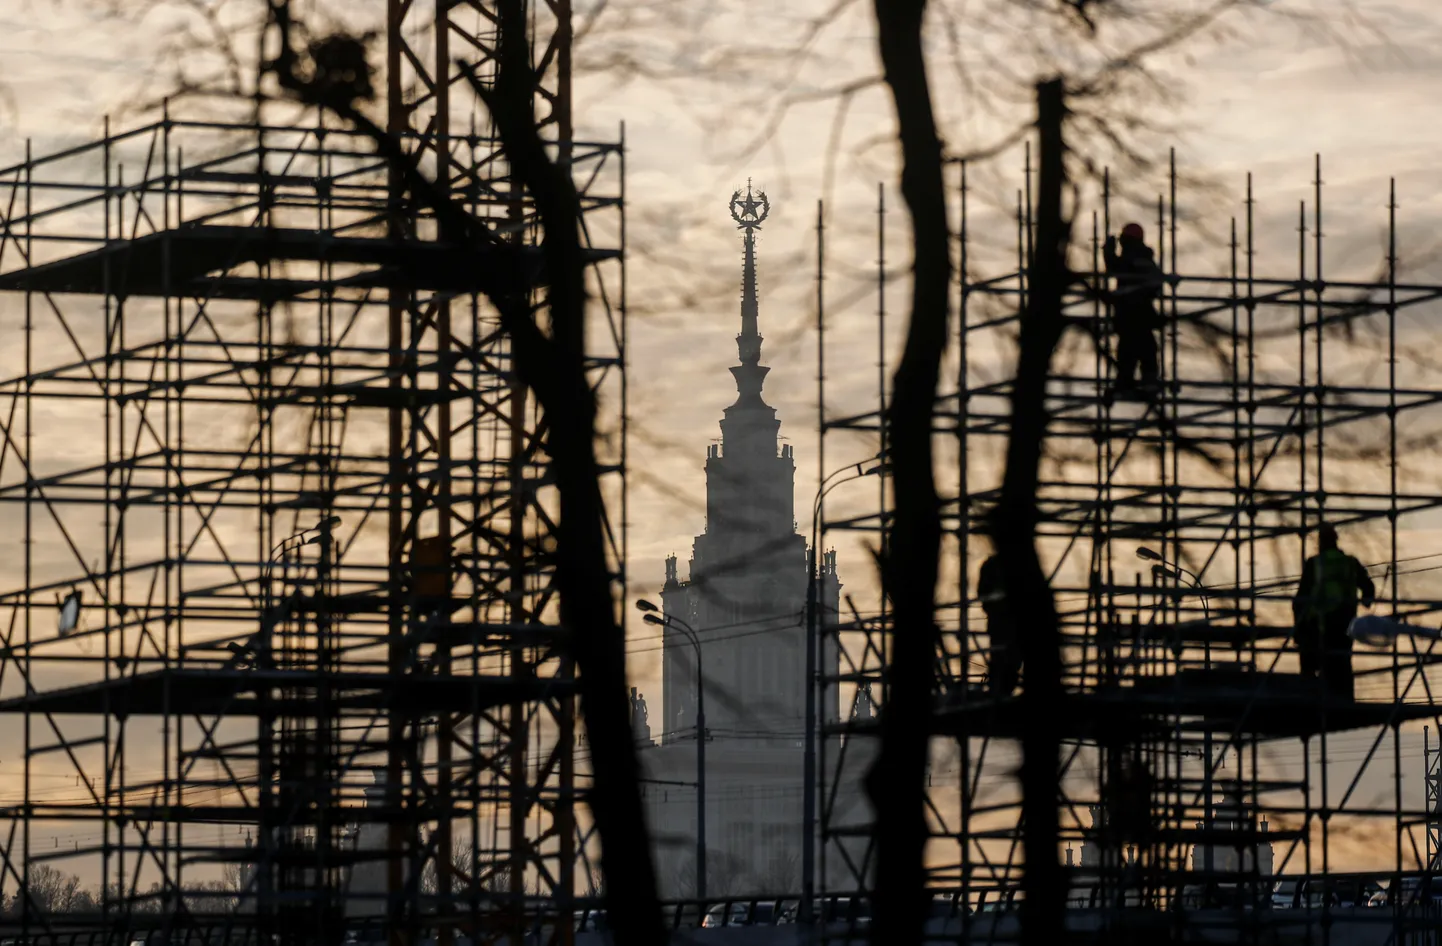 Construction workers are seen on scaffolds, with Moscow State University building in the background, in Moscow, Russia November 23, 2019. REUTERS/Maxim Shemetov